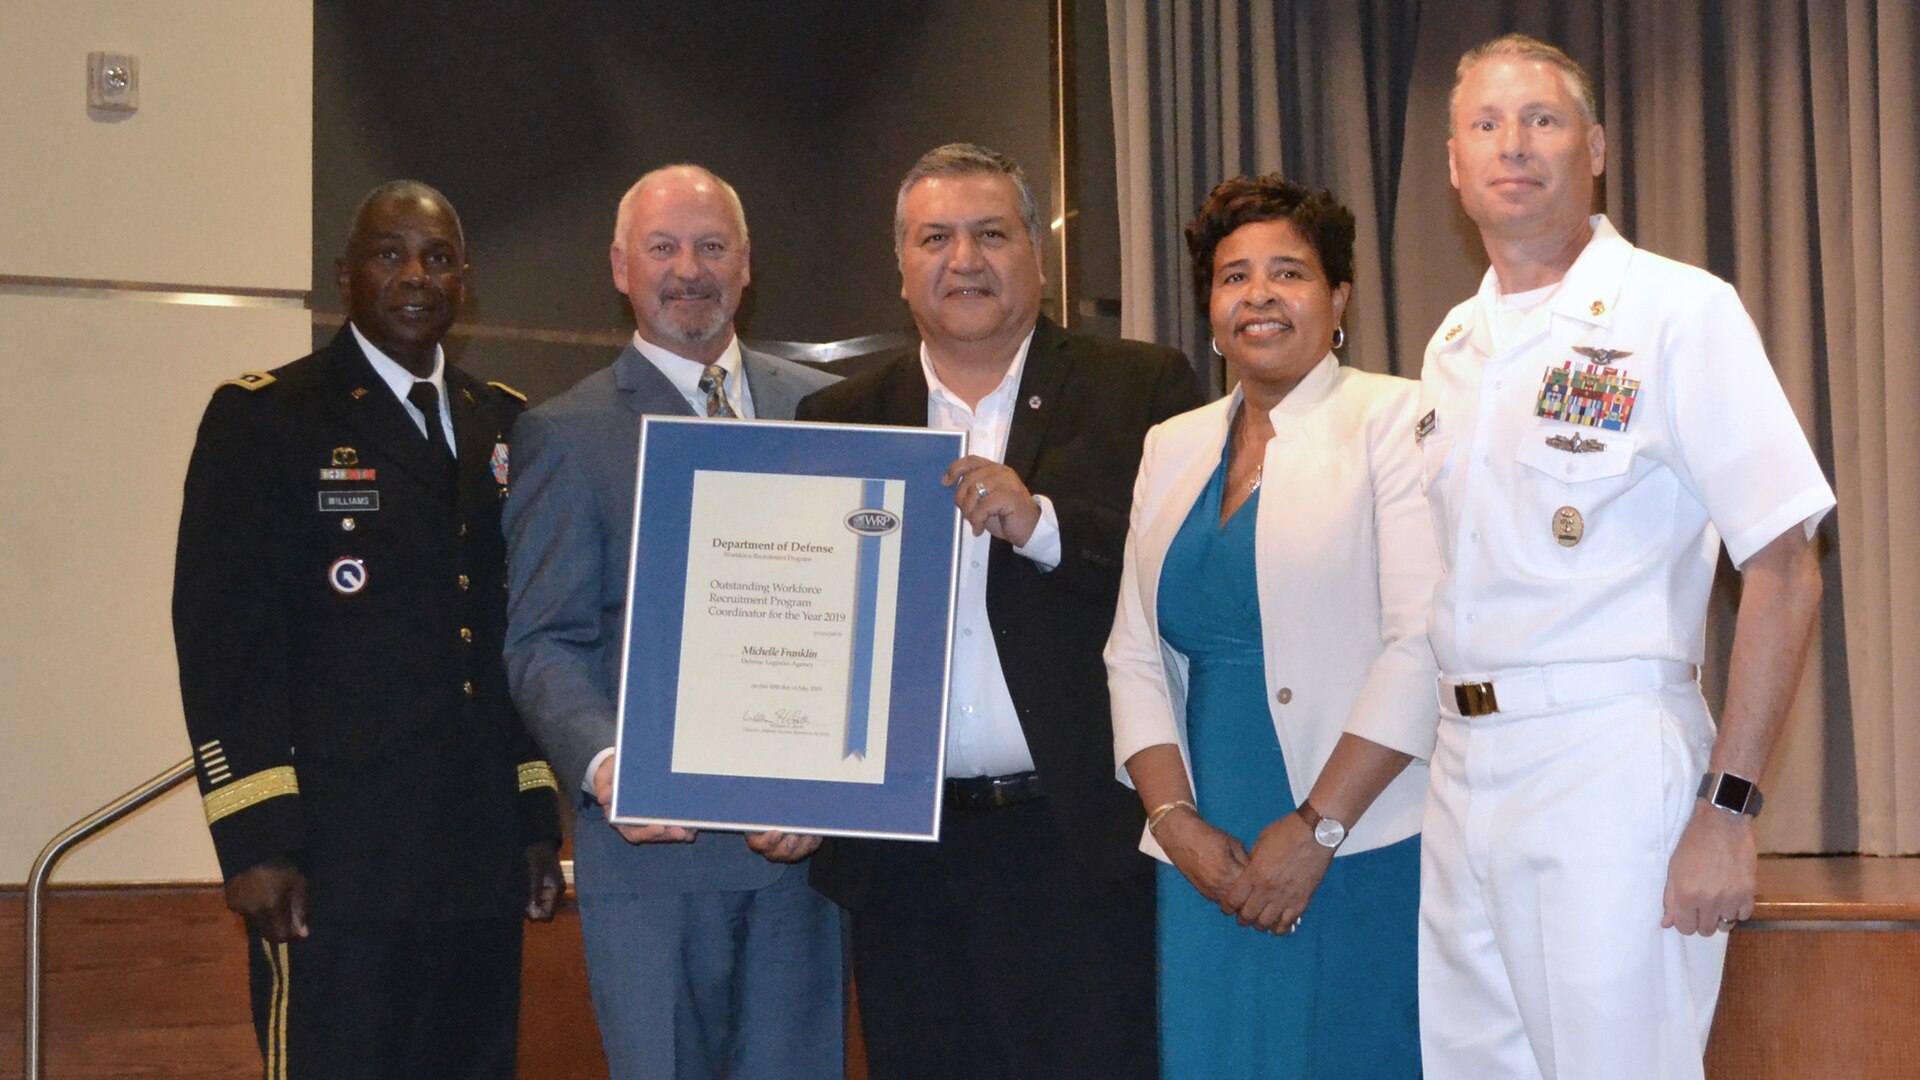 Winners and DLA representatives pose for a photo during the Defense Department’s 2018 Workforce Recruitment Program Awards ceremony July 18 in Alexandria, Virginia. From left: DLA Director Army Lt. Gen. Darrell Williams; Brian Davis, director, Defense Personnel and Family Support Center; Gilberto Vargas, EEO specialist, DLA Disposition Services (accepting for WRP Coordinator of the Year Michelle Franklin); DLA EEO and Diversity Director Janice Samuel; and DLA Senior Enlisted Leader Navy Command Master Chief Shaun Brahmsteadt